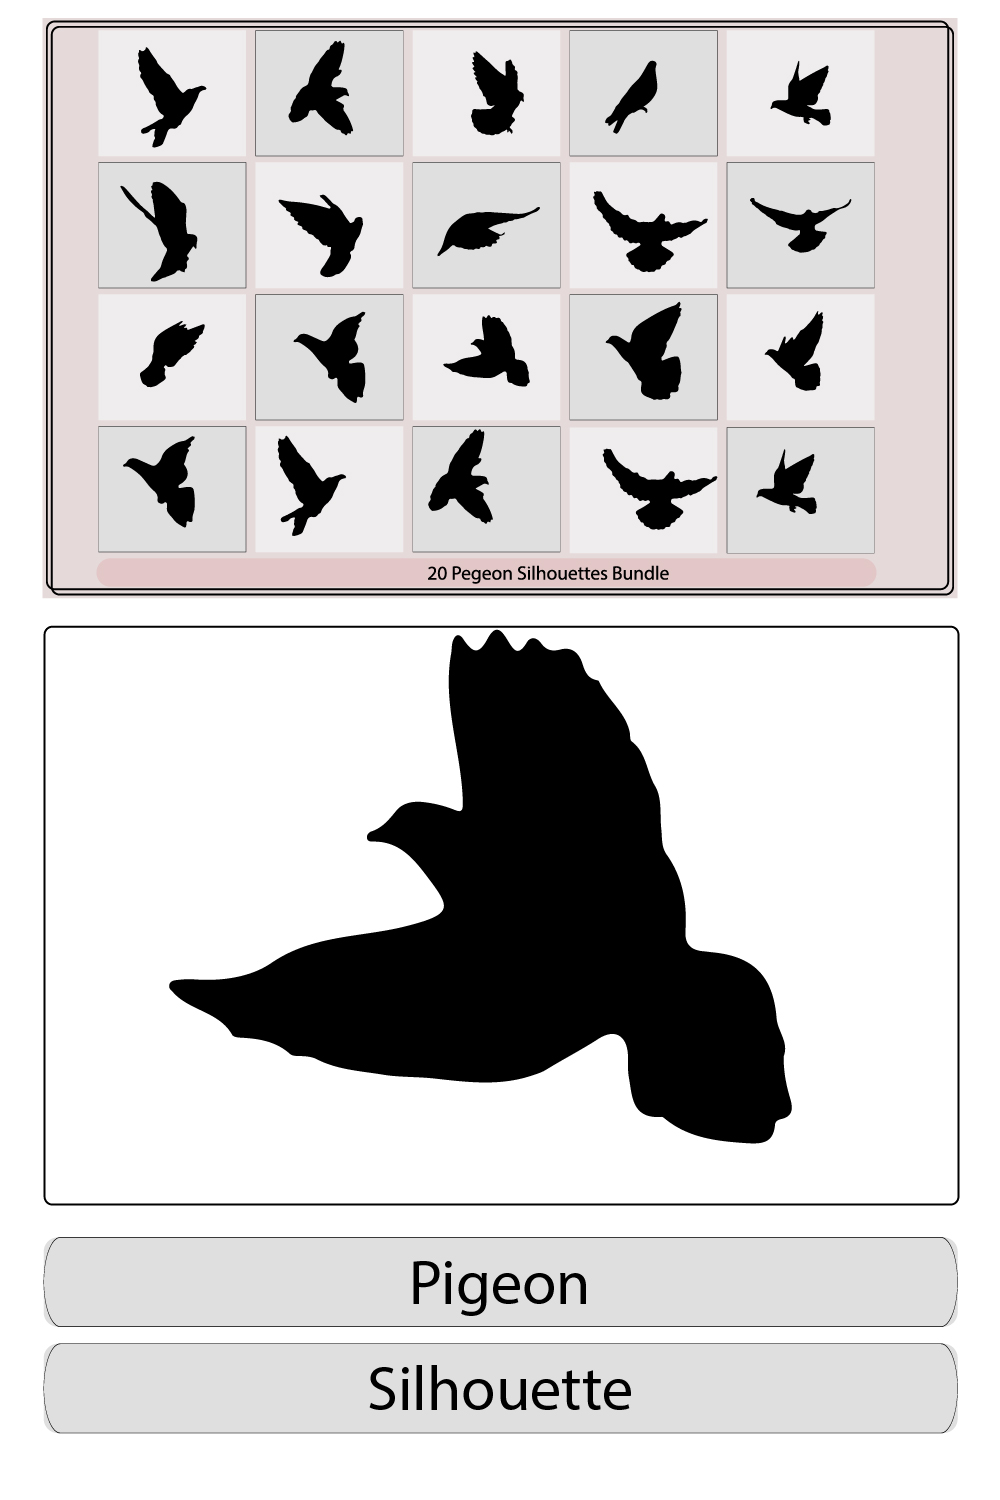 pigeons silhouette,pigeon silhouette vector,silhouettes of flying birds pigeon, pinterest preview image.